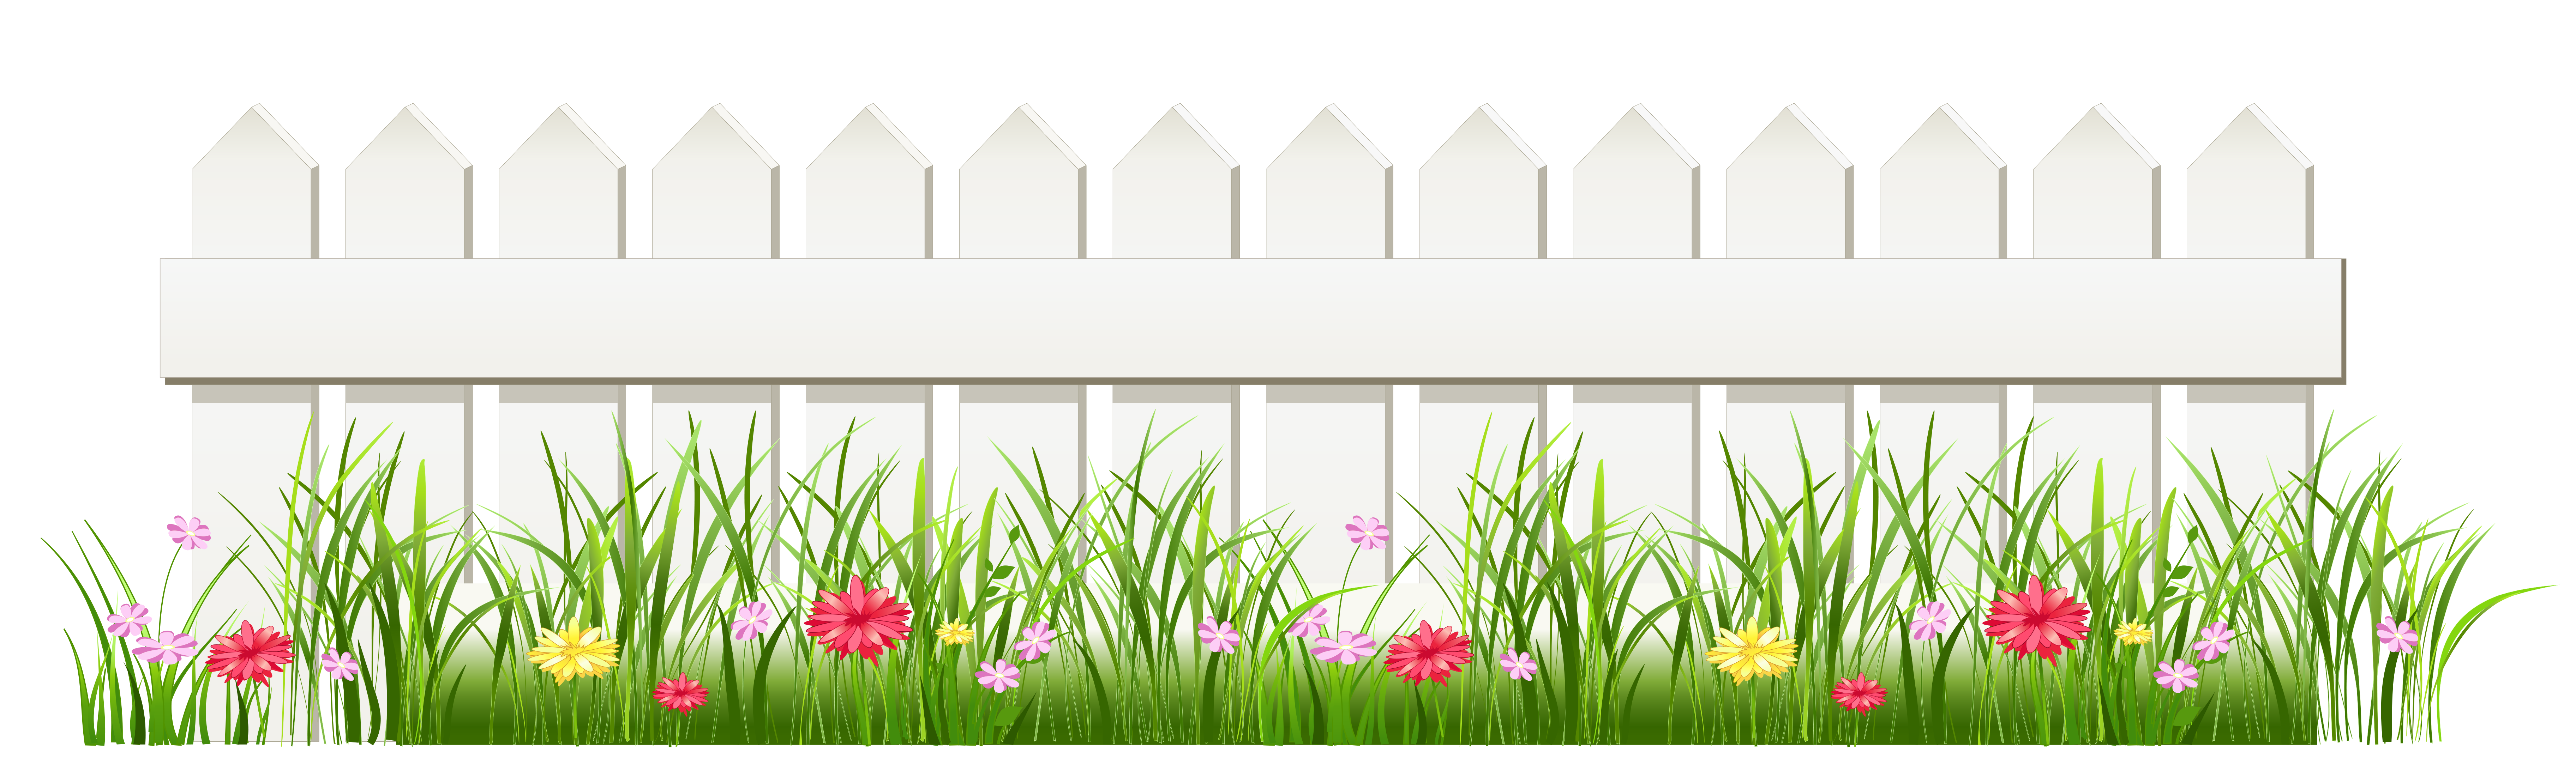 Transparent white with grass. Clipart road fence